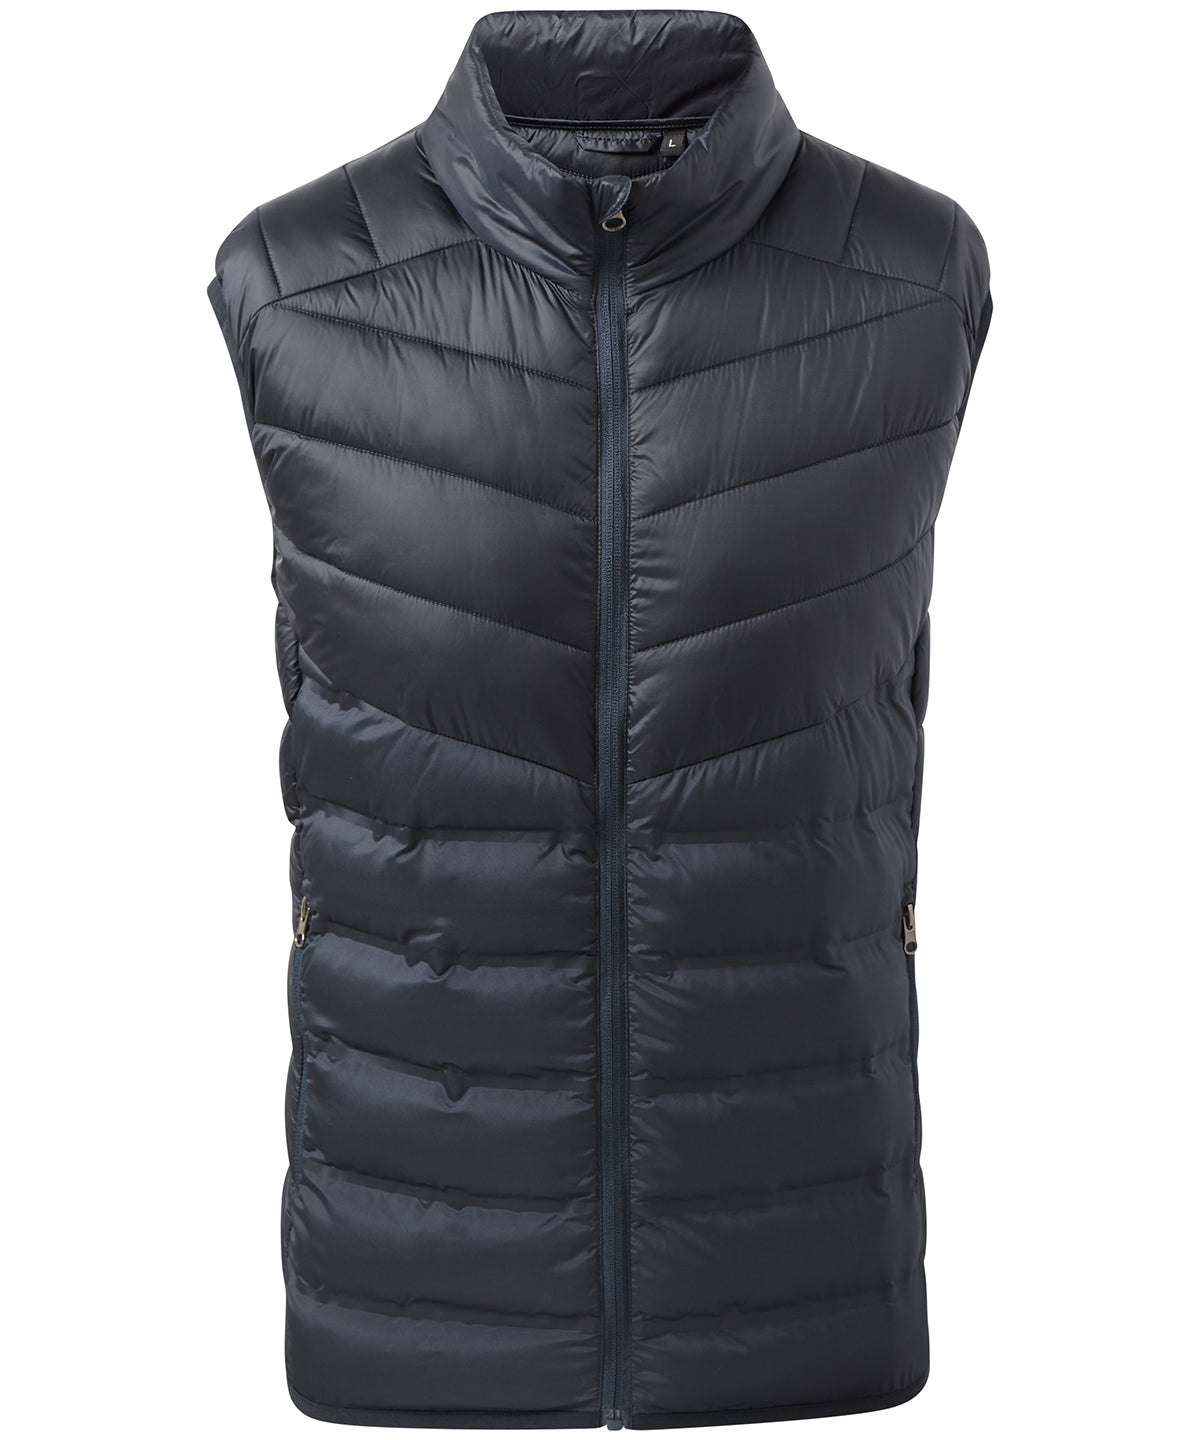 Personalised Body Warmers - Black 2786 Mantel moulded gilet